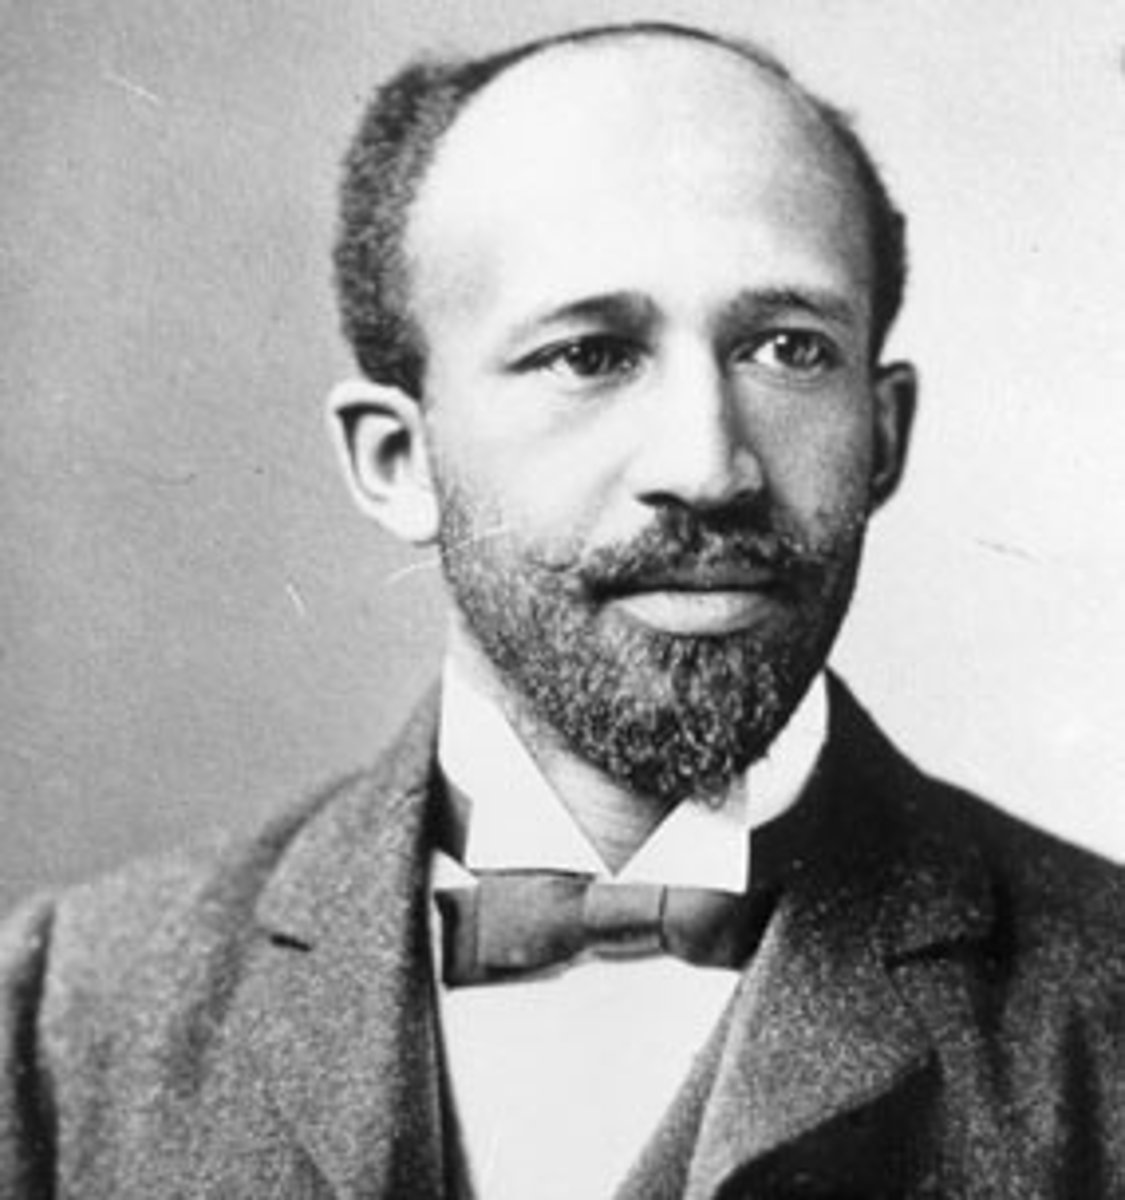 <p>fought for African American rights. Helped to found Niagara Movement in 1905 to fight for and establish equal rights. This movement later led to the establishment of the NAACP</p>